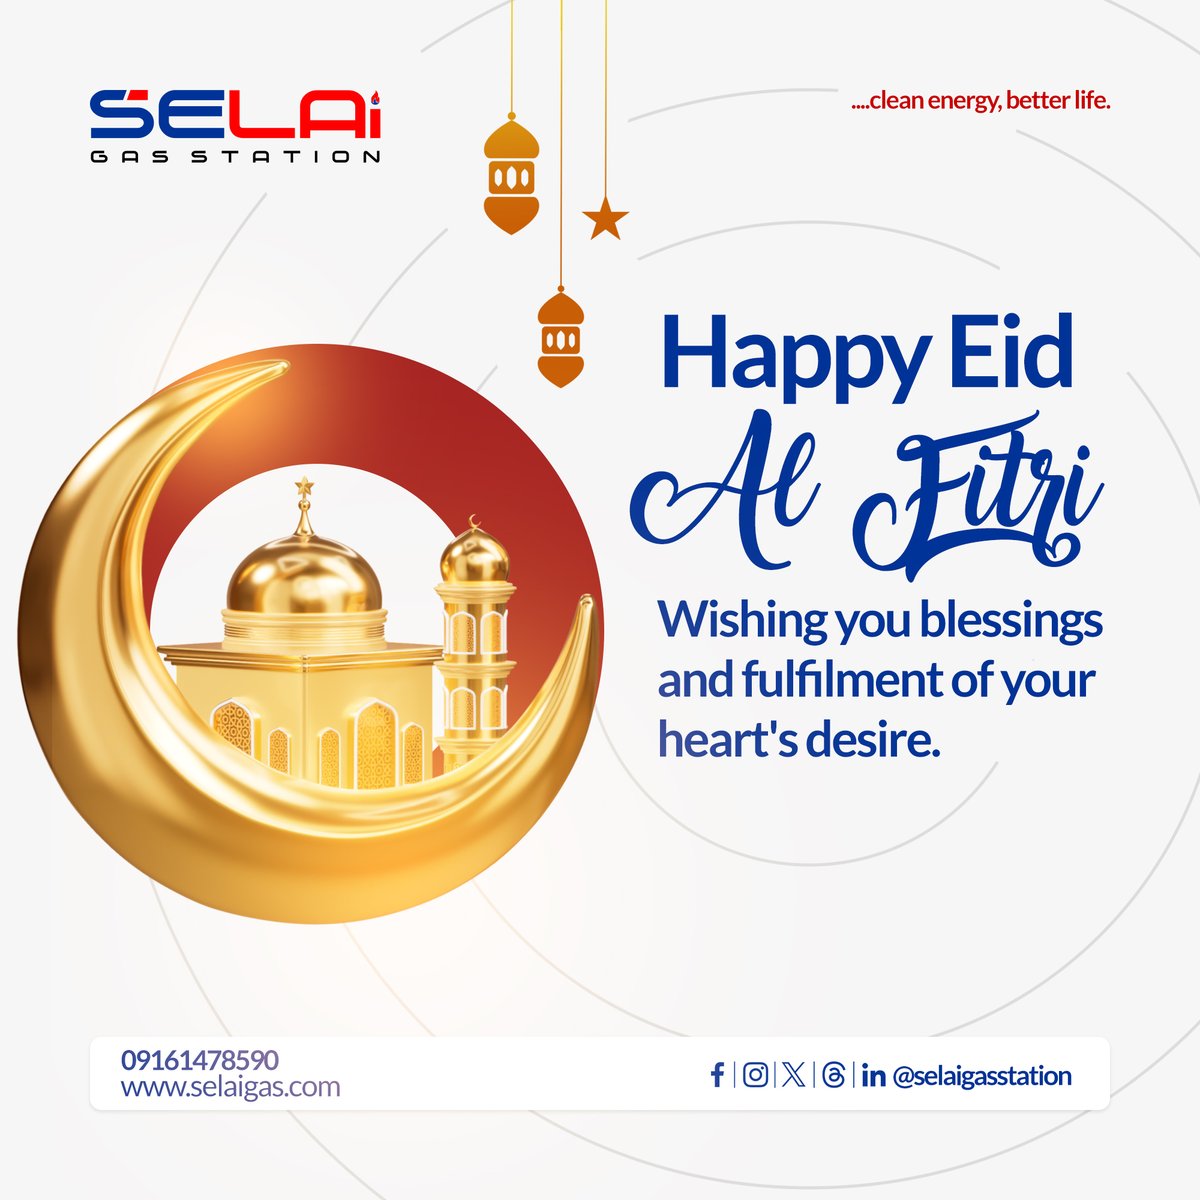 Wishing you a joyous Eid Al-Fitr!

May your celebrations be as warm and comforting as the natural gas that powers your home.

Happy Eid Al-fitr from SELAI GAS.

#SELAIGas #EidAlFitr